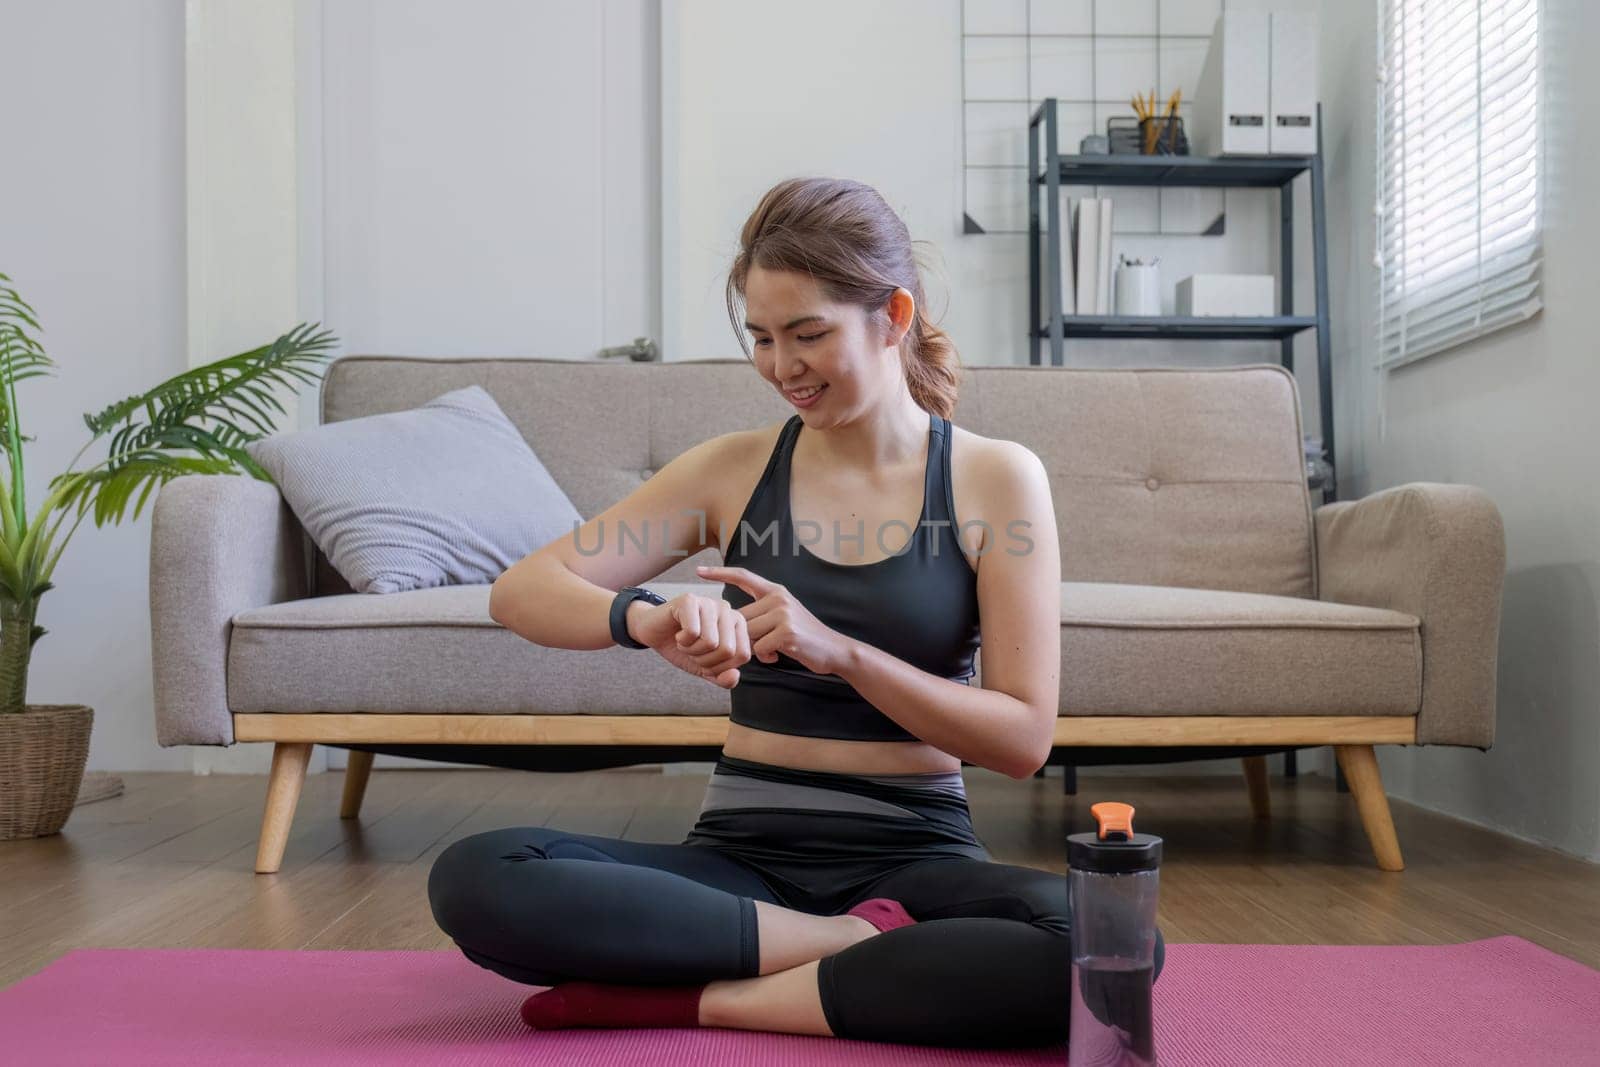 Young fit Asian woman sits on the floor and looks at her smart watch in the living room. An athlete is viewing her performance on a fitness smartwatch app after a workout..